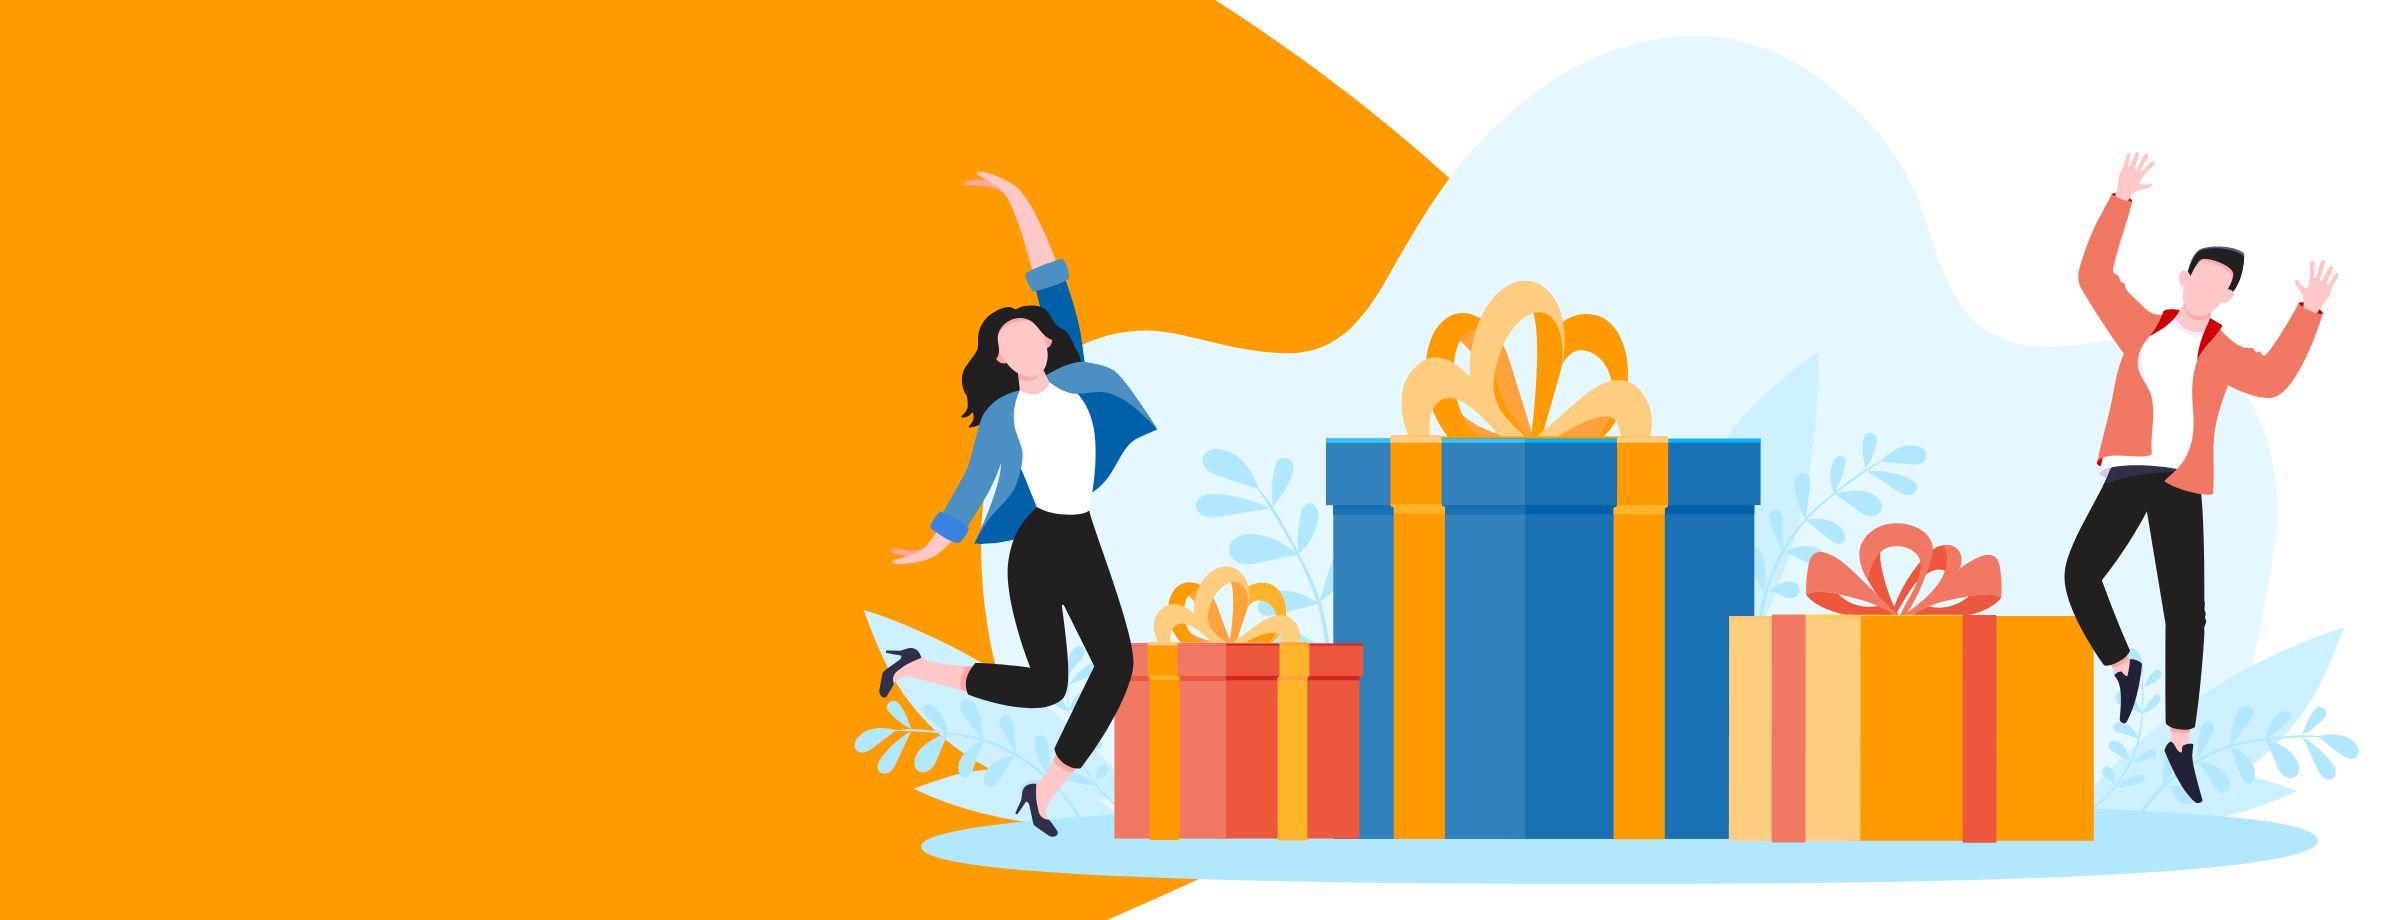 Gift ideas for your MSP’s clients